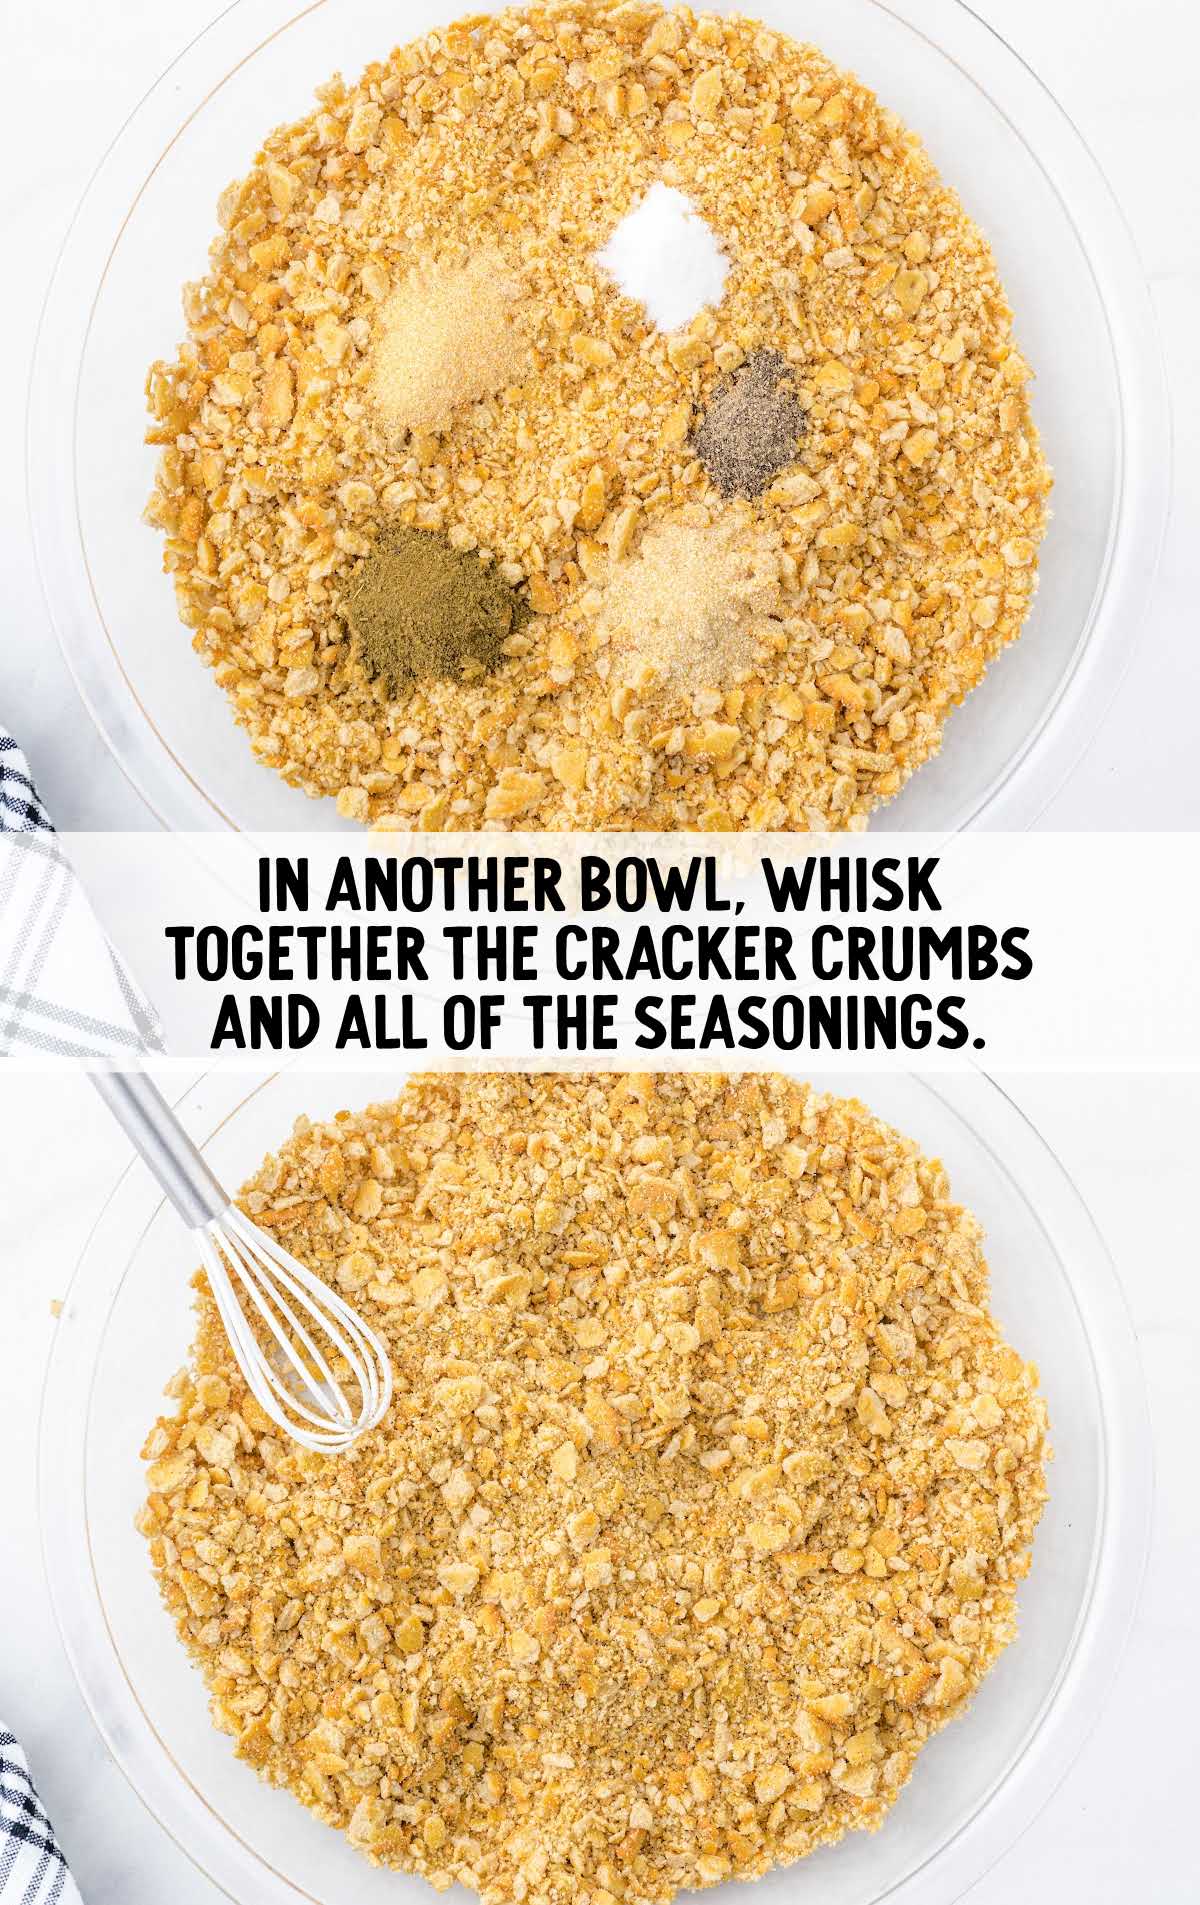 cracker crumbs and seasonings whisked together in a bowl